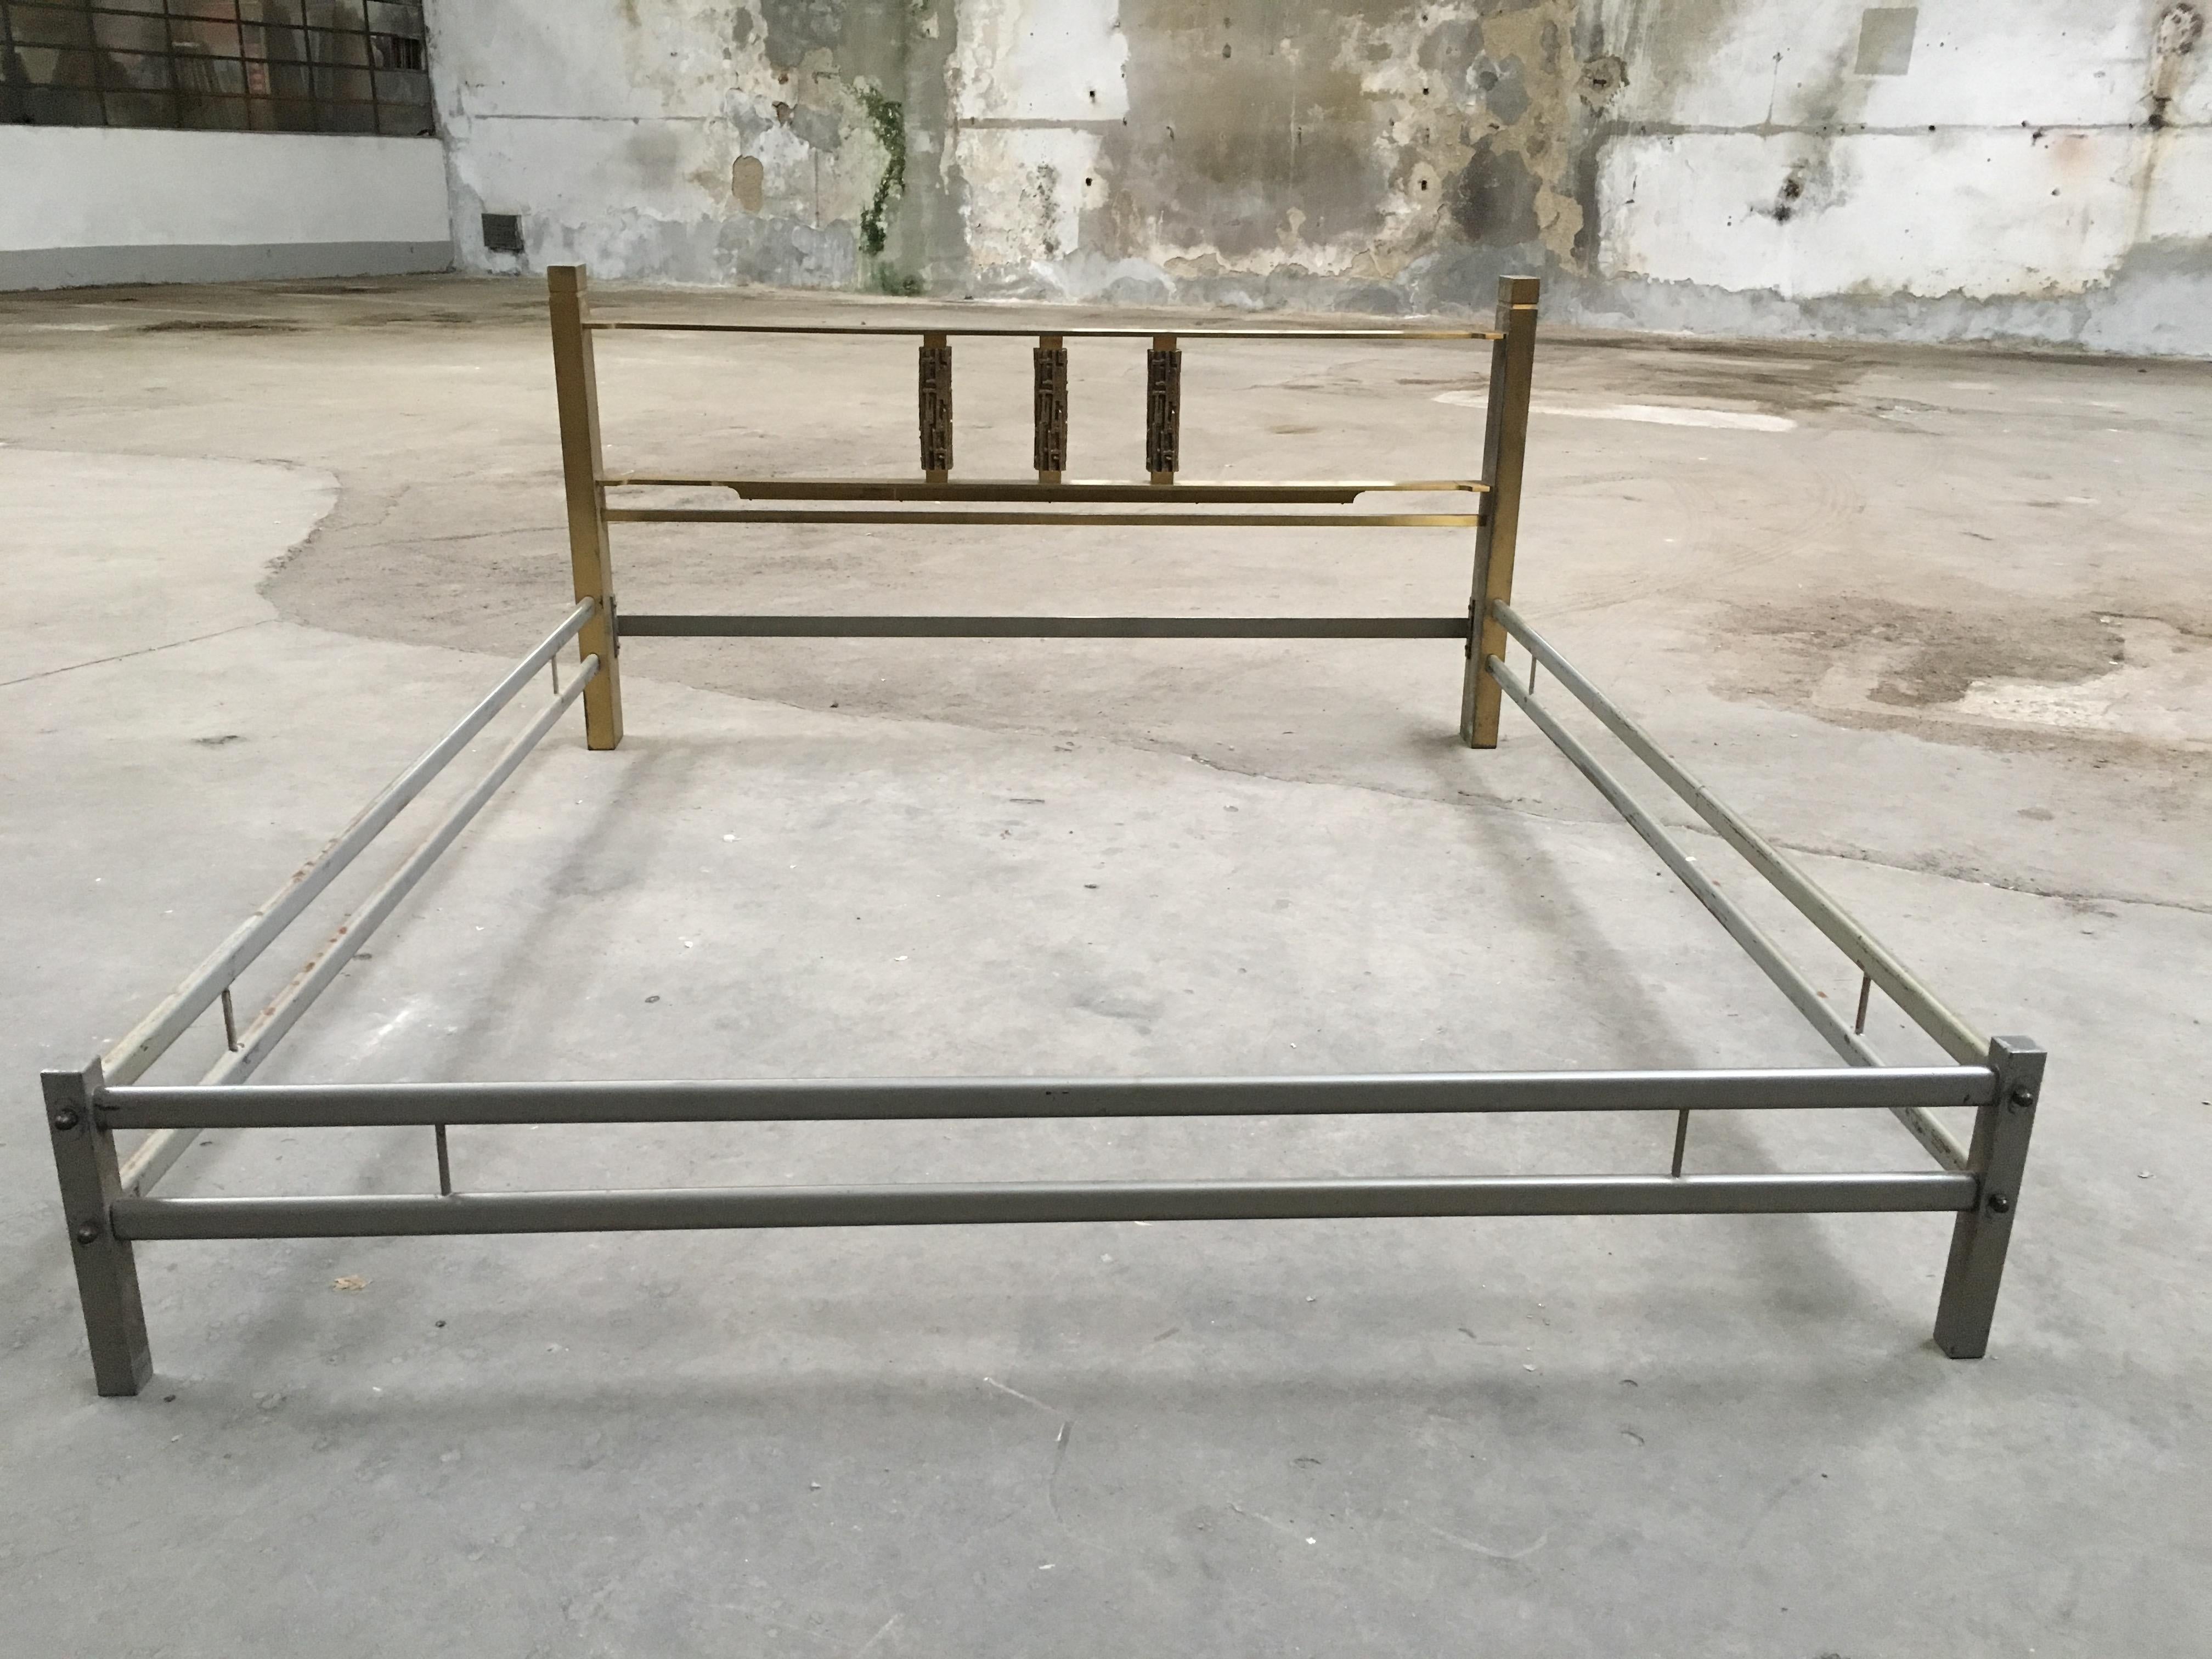 Mid-Century Modern Italian bronze bed by Luciano Frigerio for 'Frigerio di Desio' from 1970s.
The bed needs a bed net of cm.165 width and cm. 190 length
Measurements of the bed structure: cm.176 x 211 x H. 89.